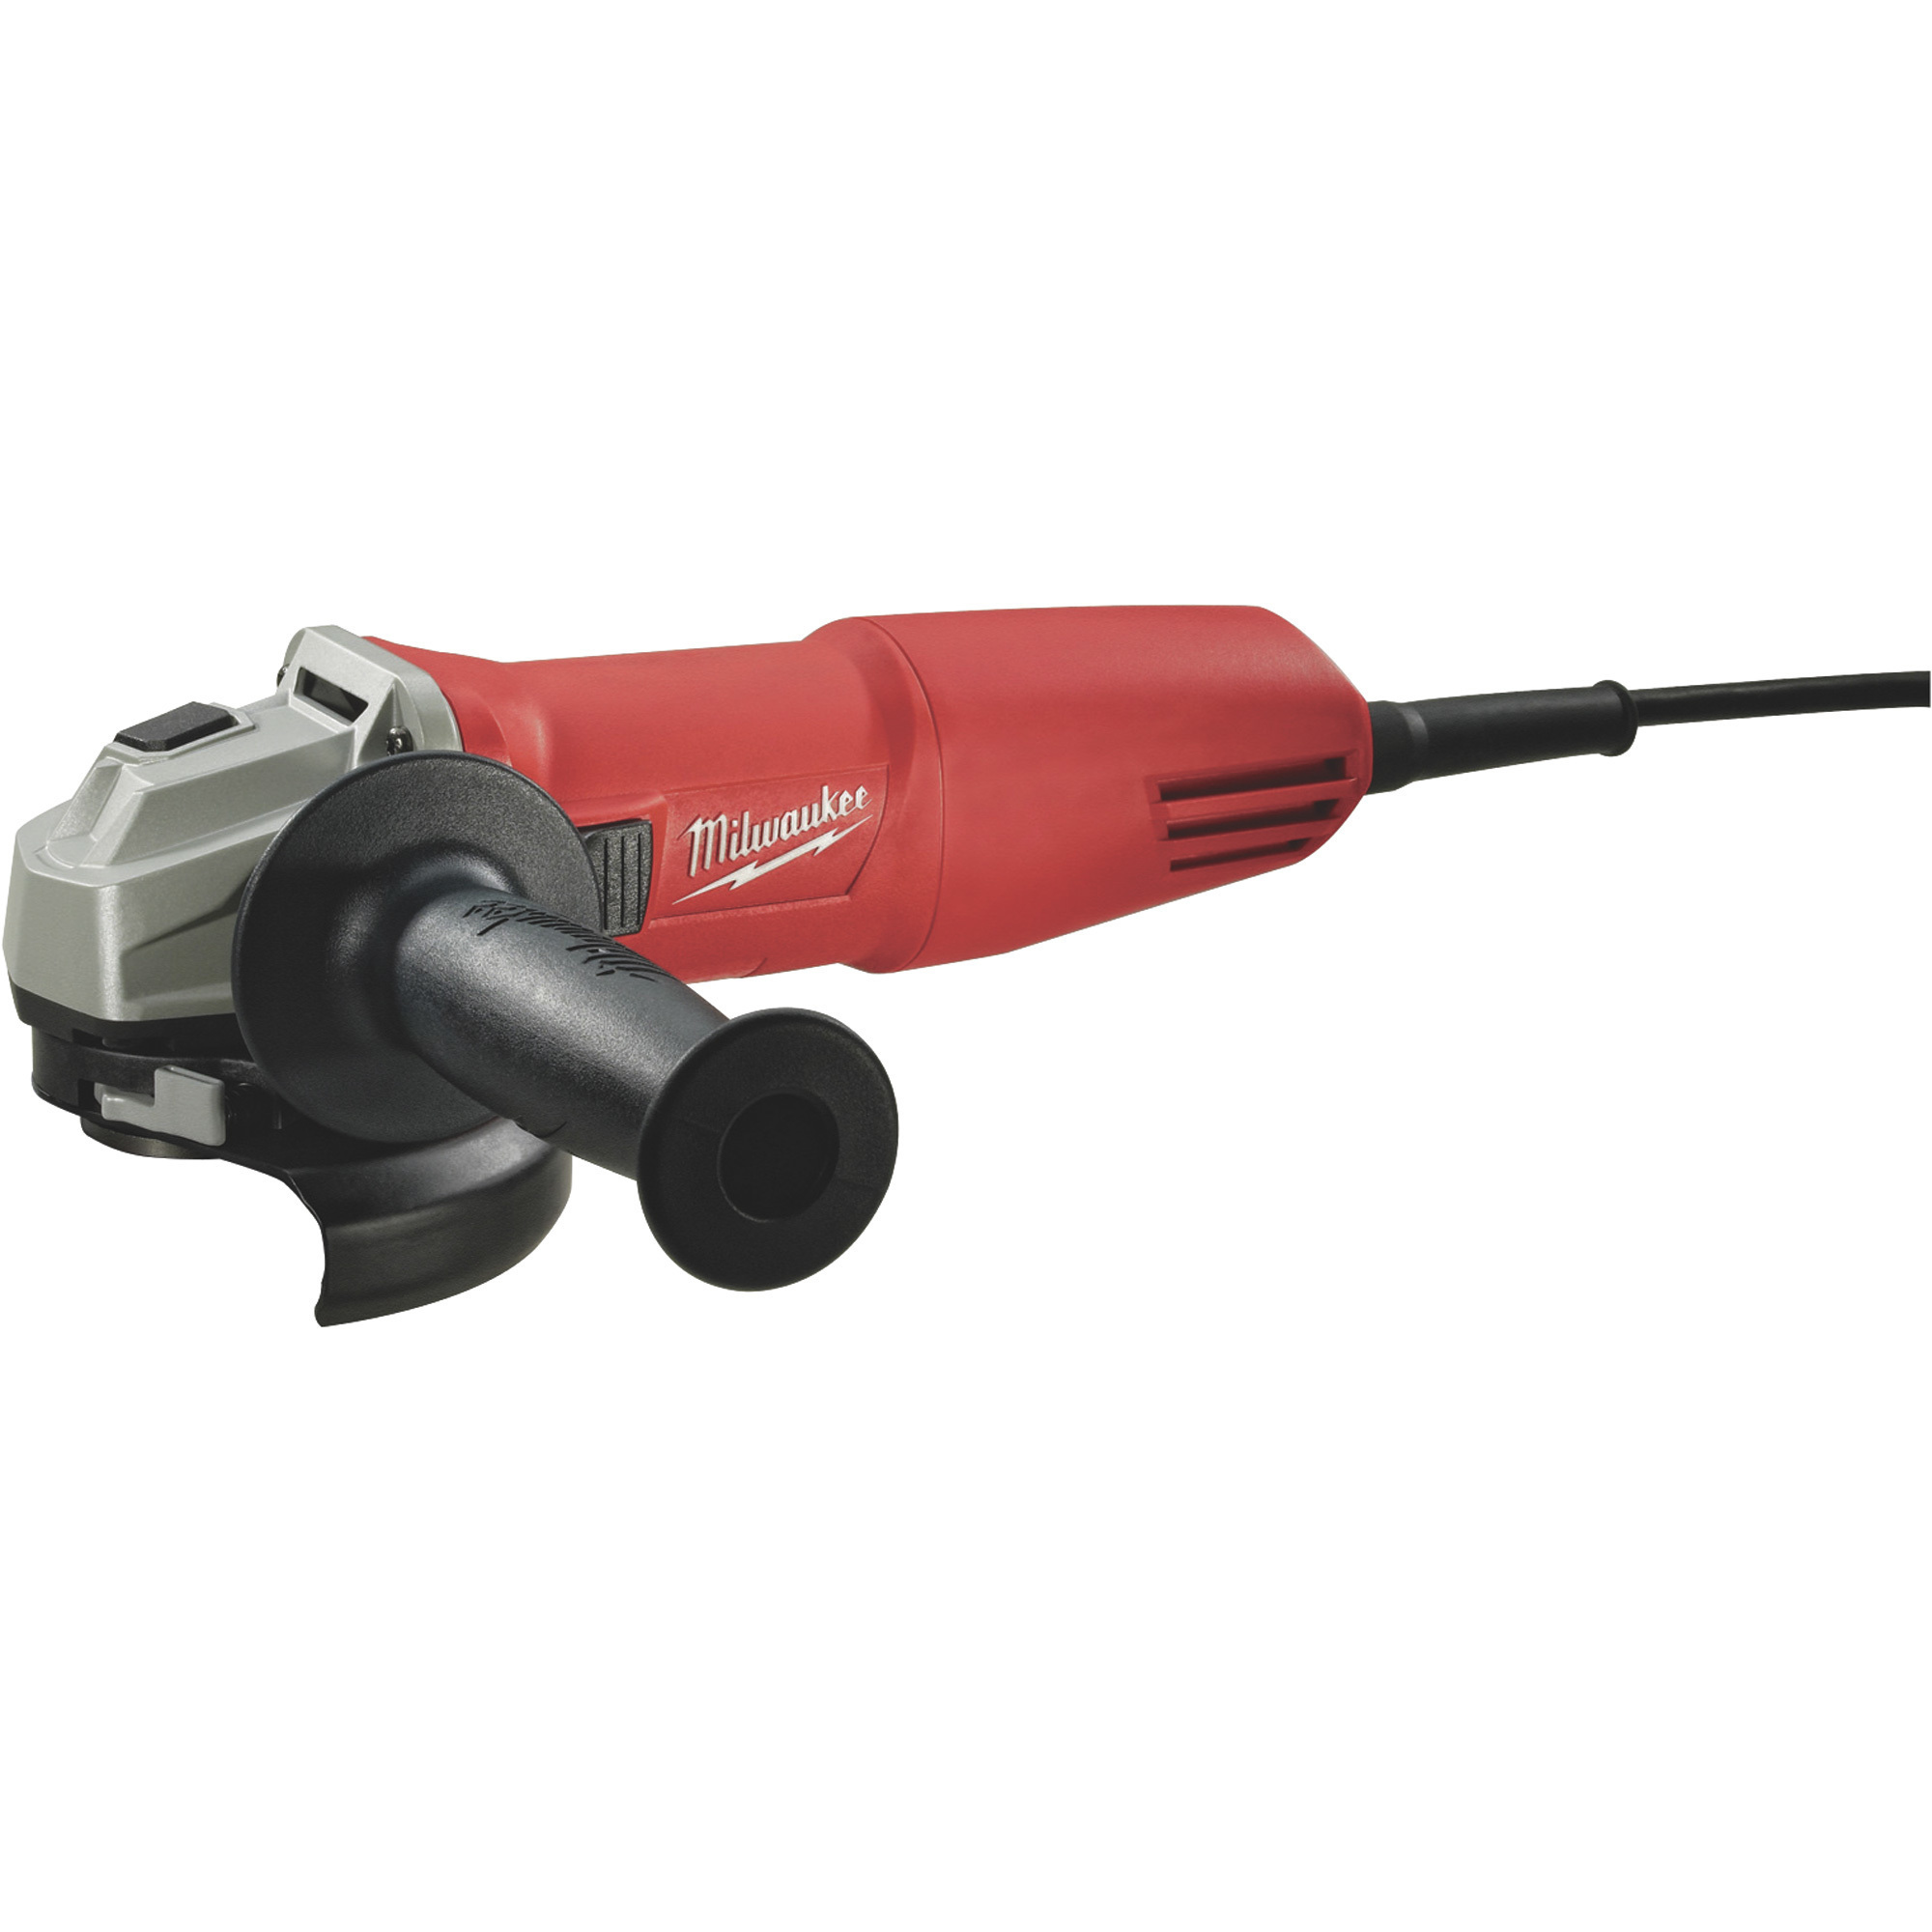 Milwaukee Small Angle Grinder, 7 Amp, 11,000 RPM, Slide Switch, Model 6130-33